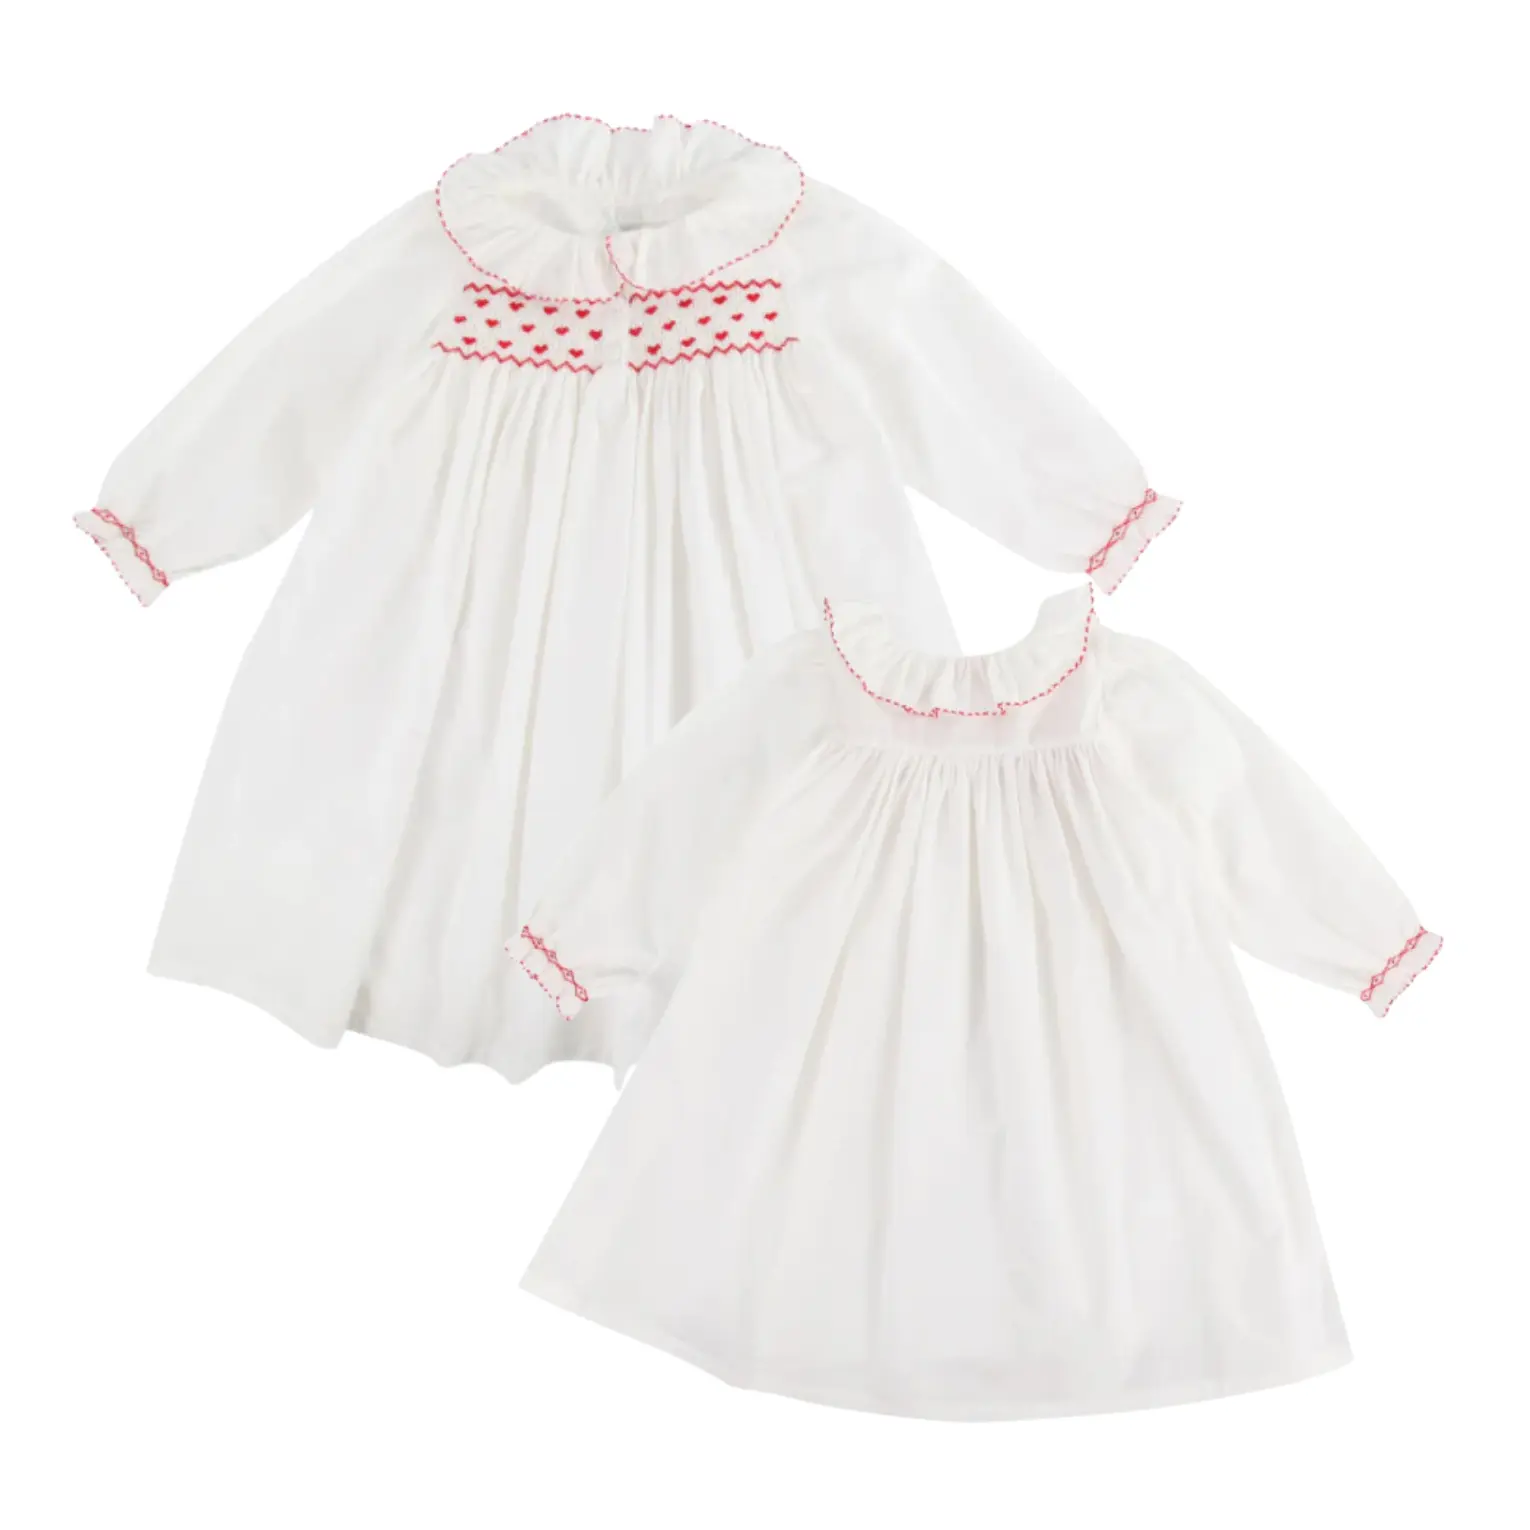 Wholesale Hight Quality Children Clothes Girl Smocked Dress Pajamas From 2M To 12Y Soft Comfortable Long Vietnam Manufacture